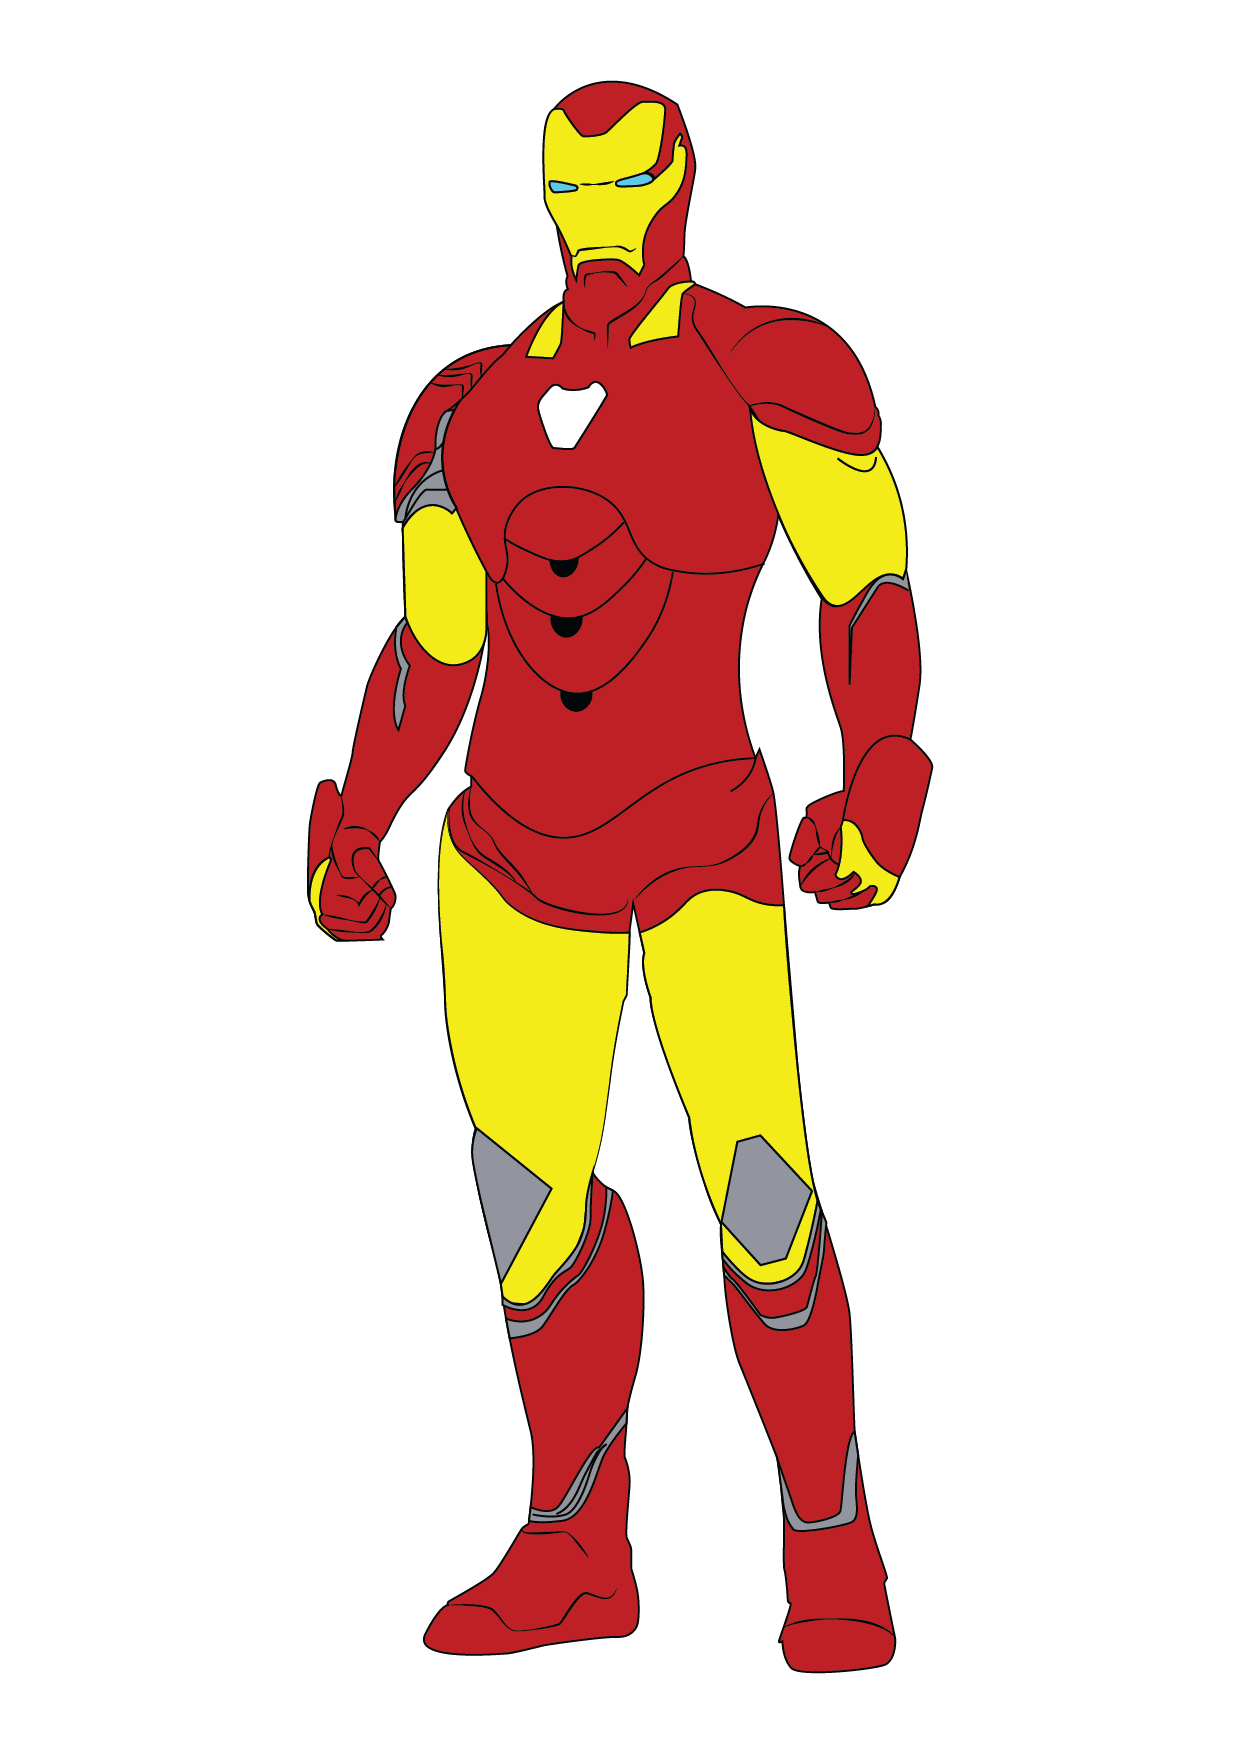 How to Draw Iron Man Step by Step Printable